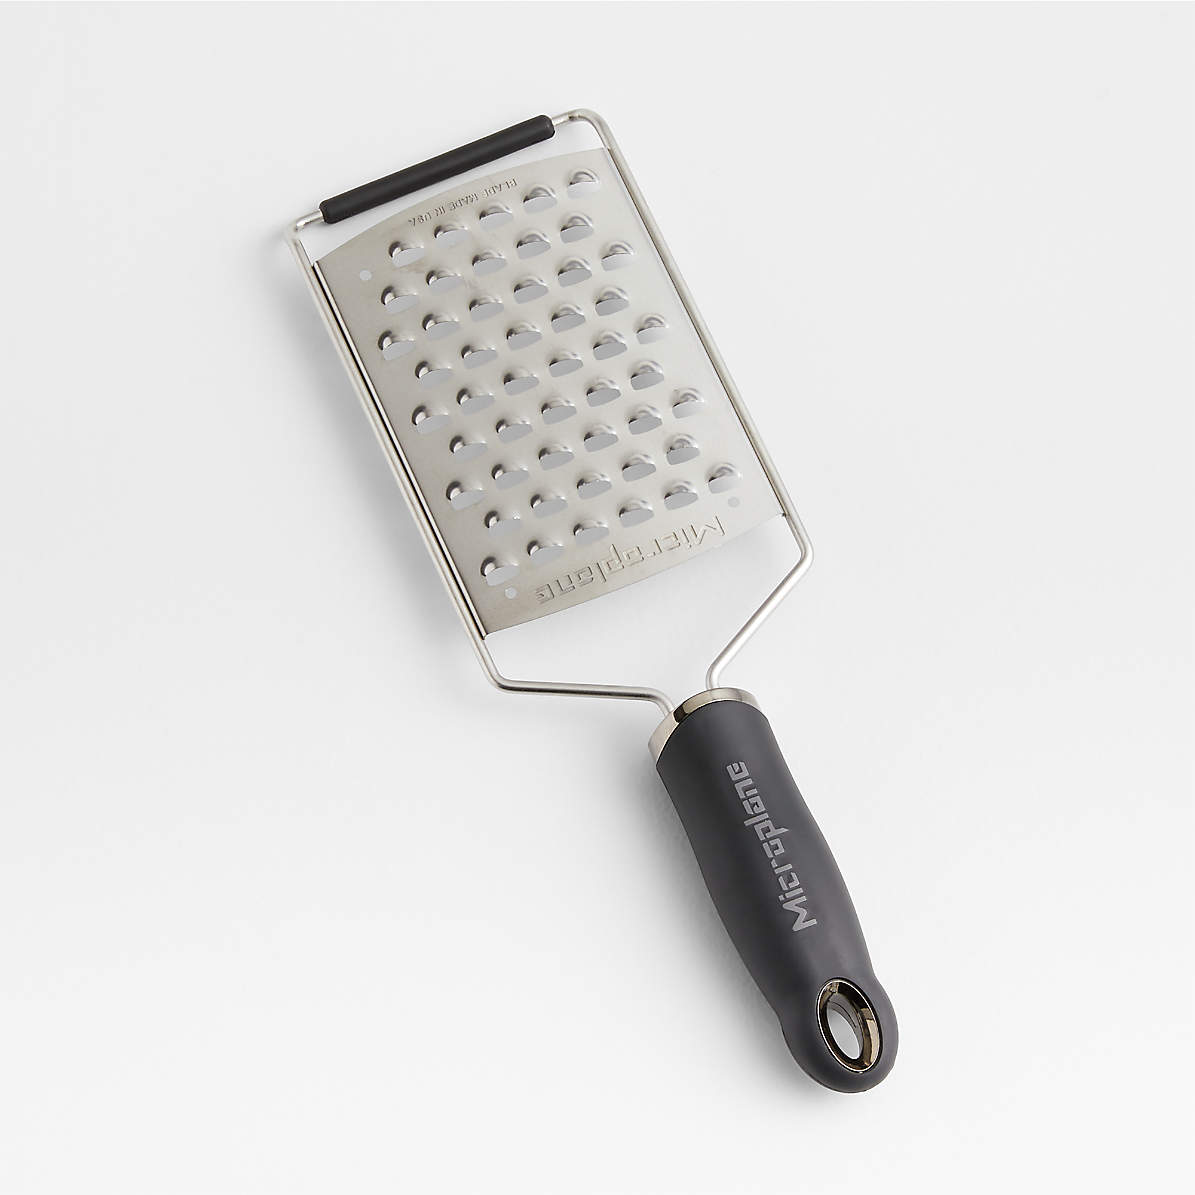 Microplane Professional Coarse Grater  Advantageously shopping at